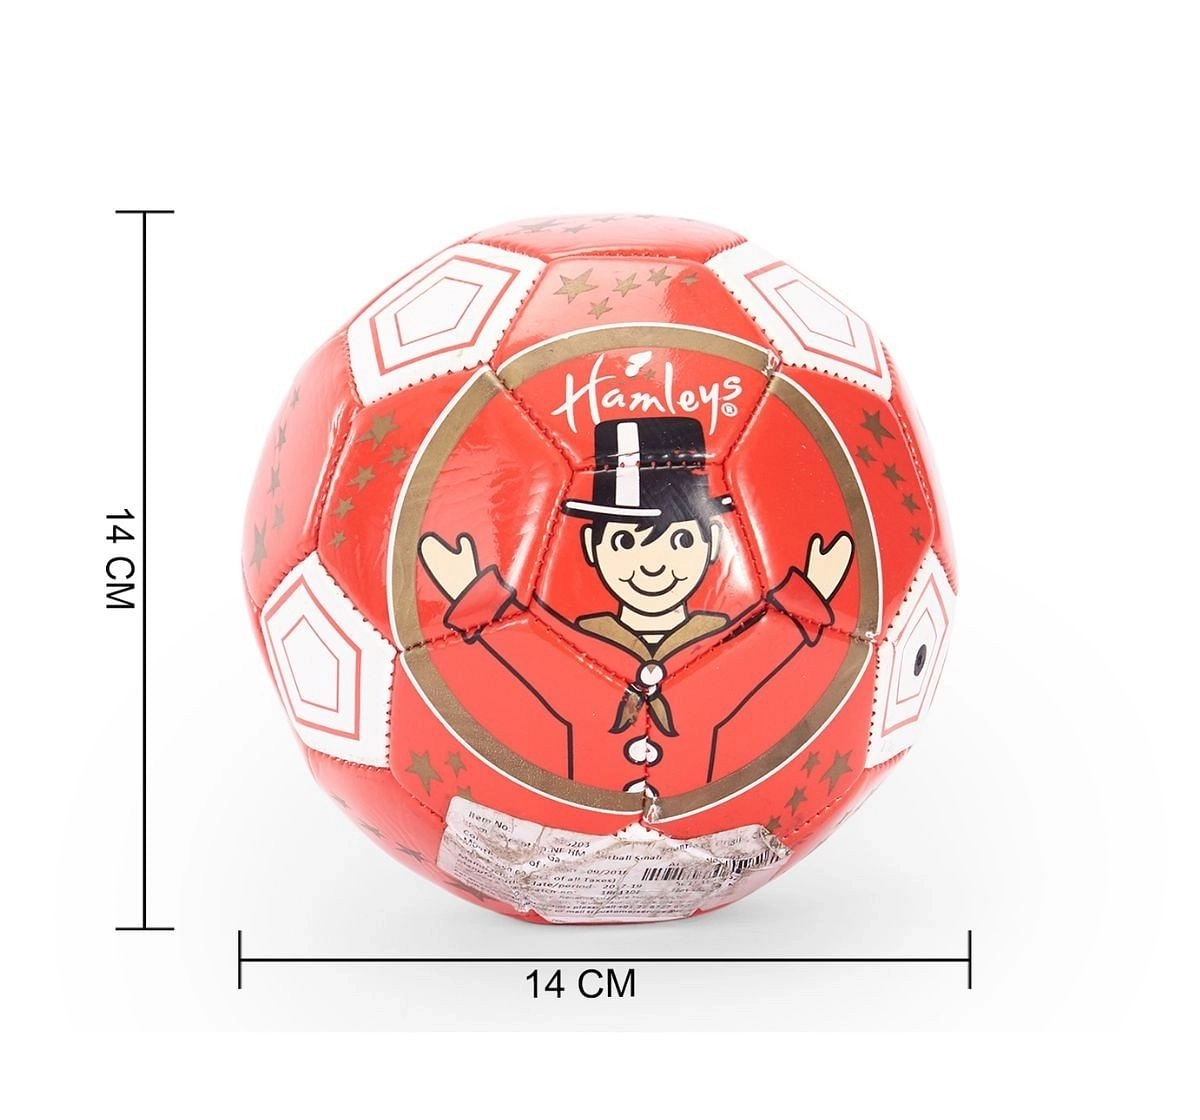 Hamleys Football Small Ball Sports & Accessories for Kids age 3Y+ (Red)